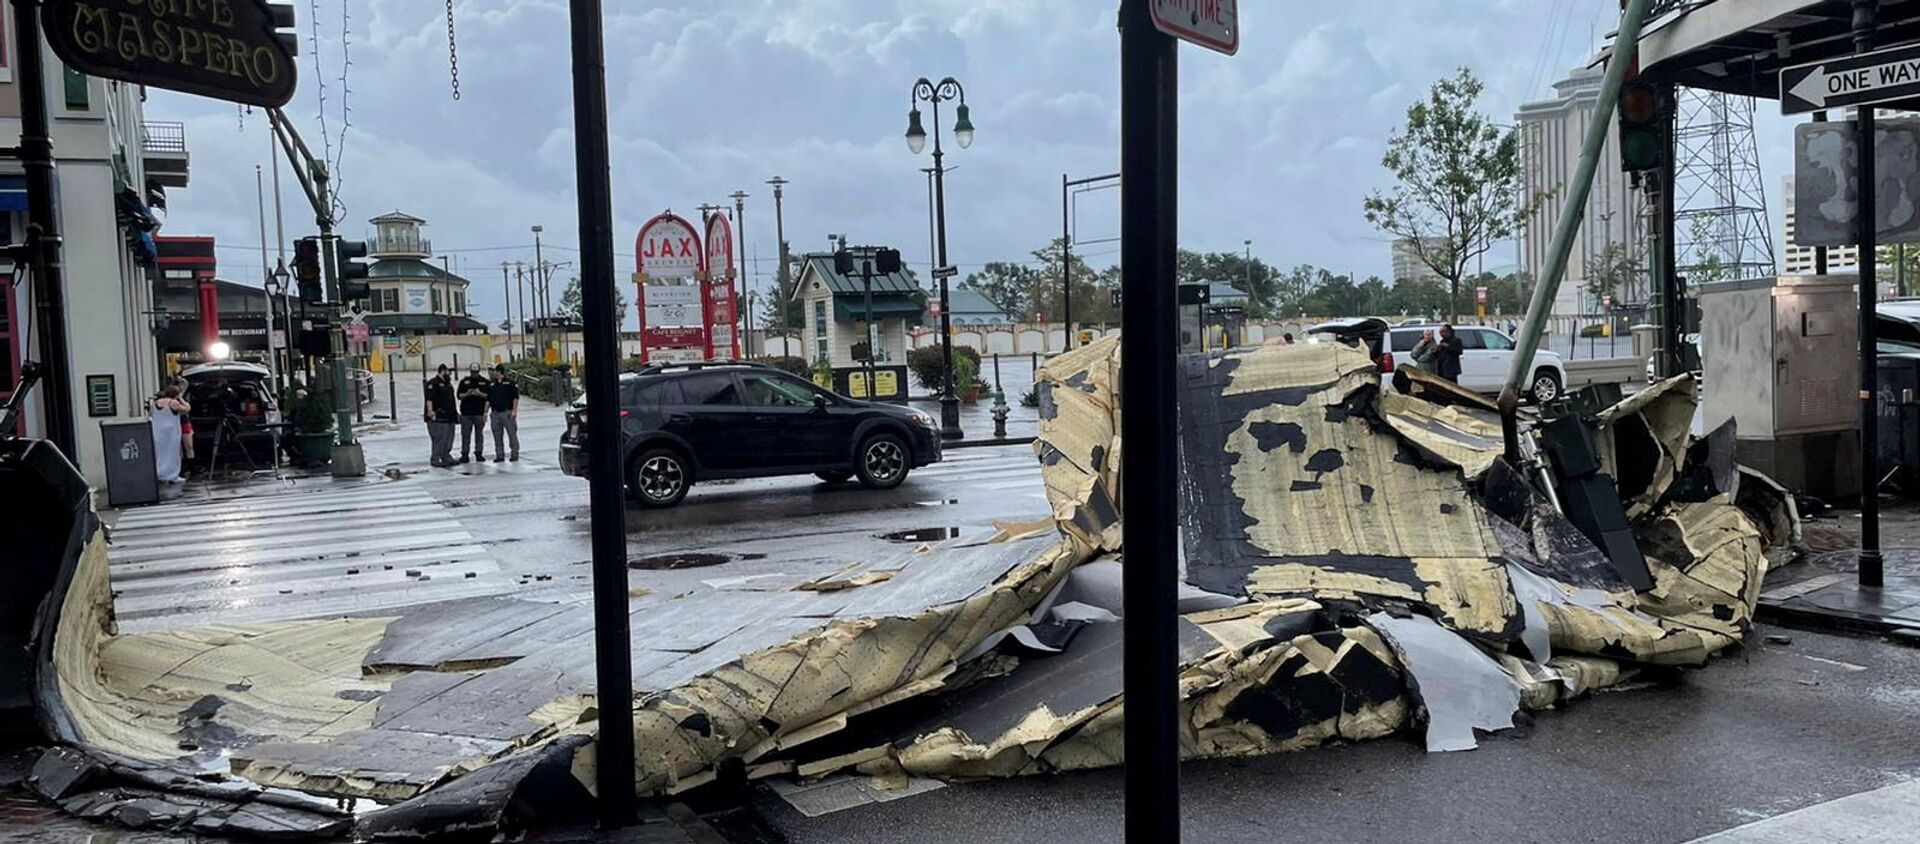 The roof of a building next to Jax Brewery lies on the ground after it was blown off due to strong winds from Hurricane Ida in New Orleans, Louisiana, U.S., August 30, 2021. - Sputnik International, 1920, 02.09.2021